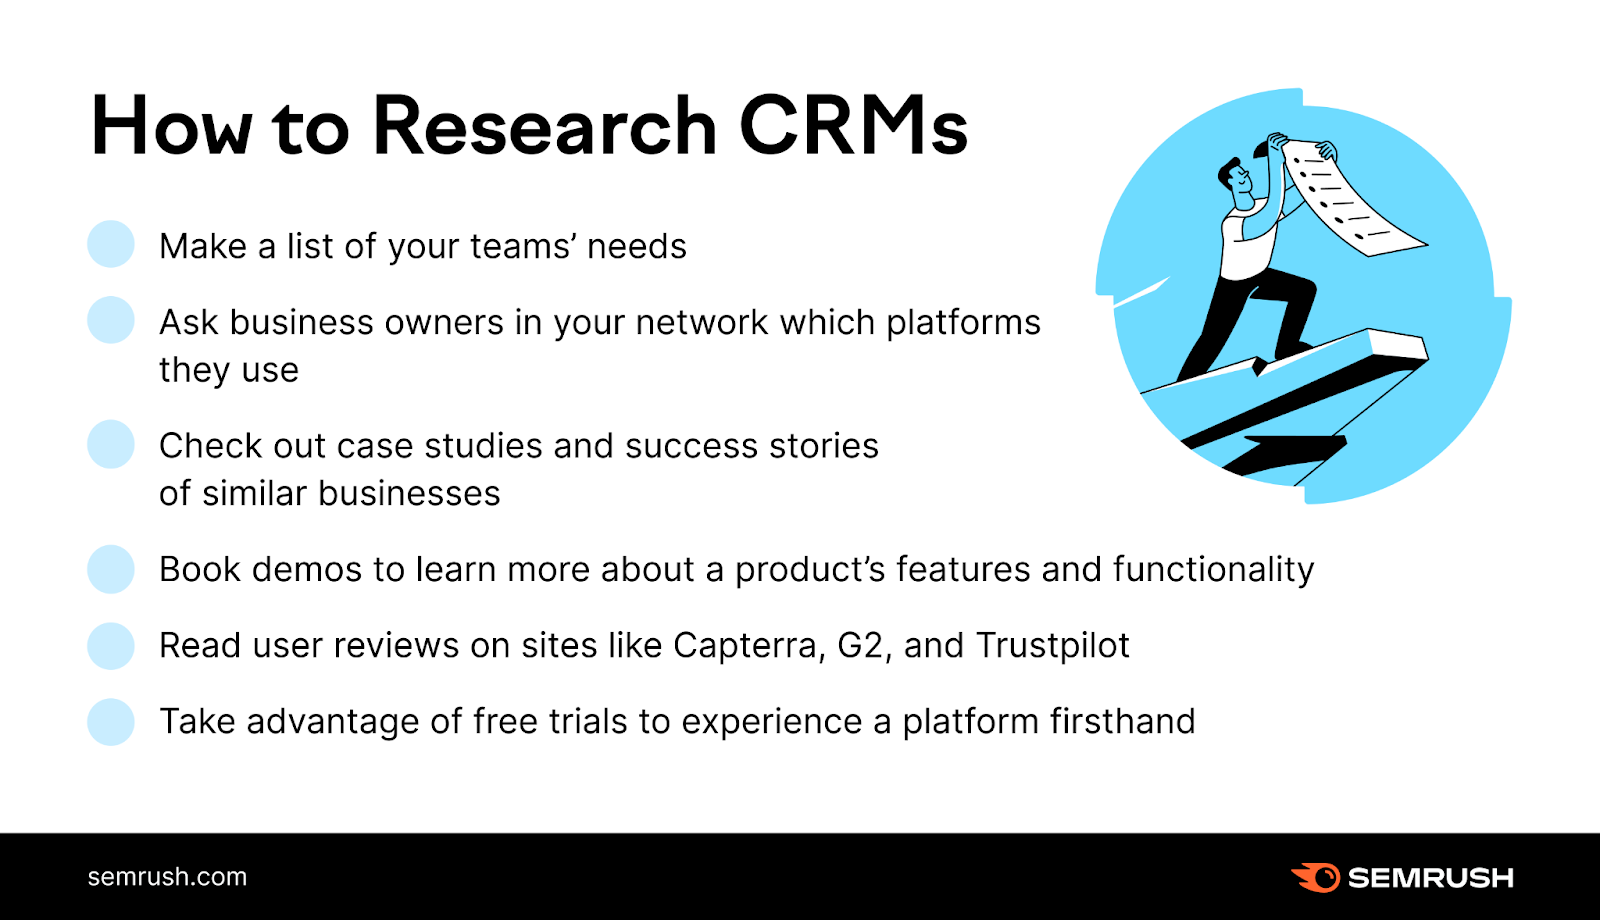 an infographic with tips on how to research CRMs